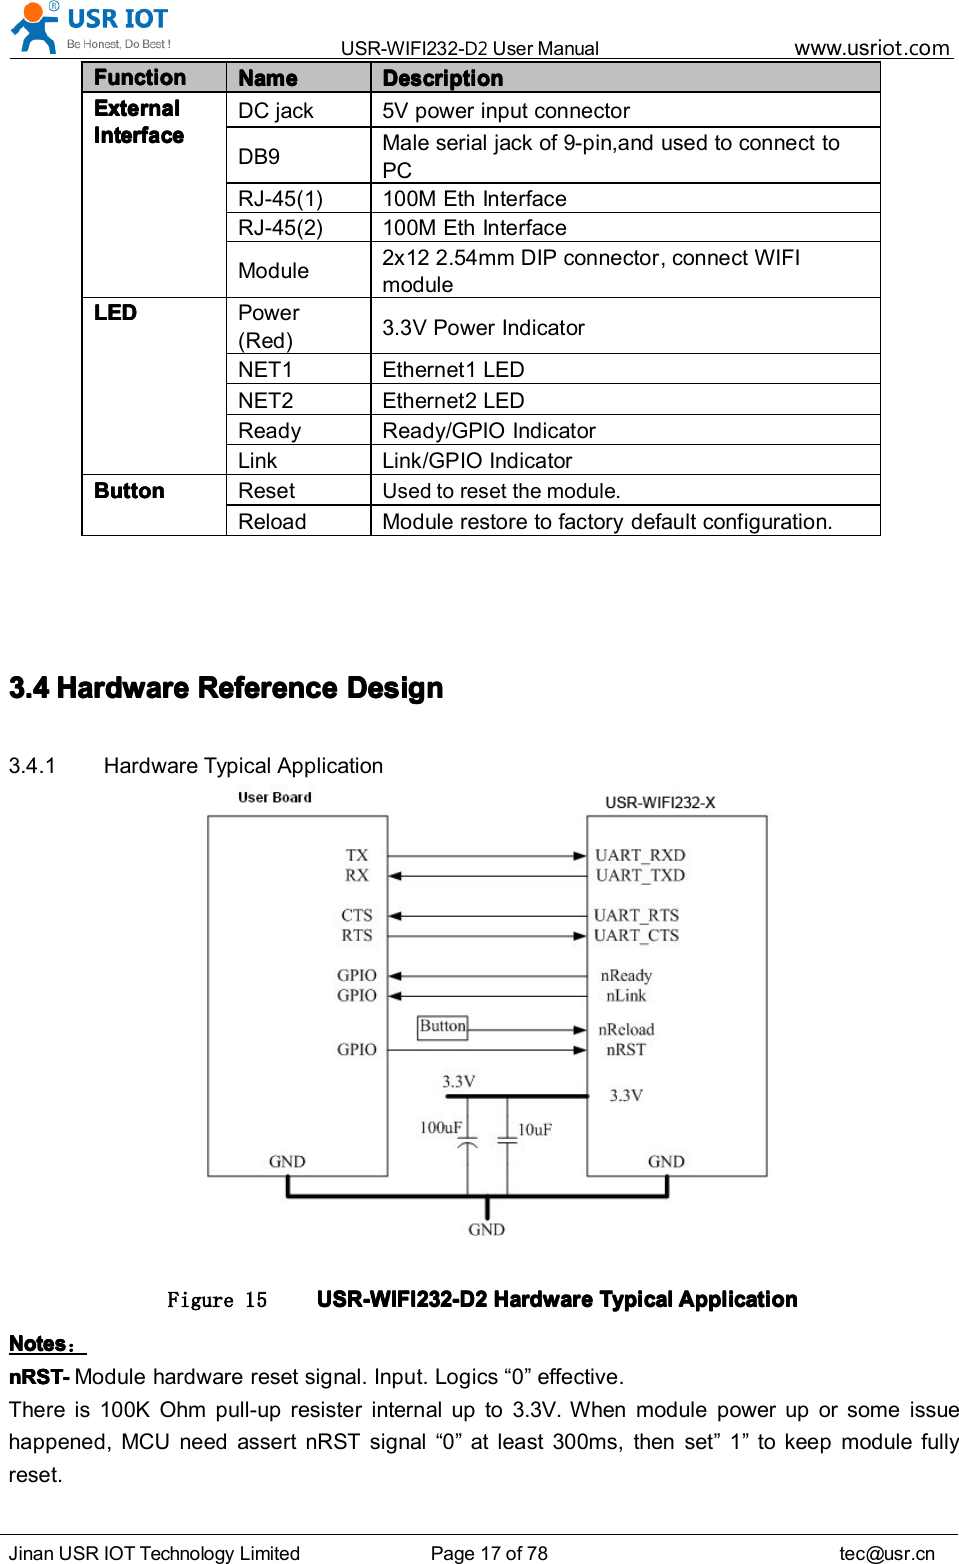 USR-WIFI232- D2 User Manual www.usr iot .comJinan USR IOT Technology Limited Page 17 of 78 tec@usr.cn3.43.43.43.4 HardwareHardwareHardwareHardware ReferenceReferenceReferenceReference DesignDesignDesignDesign3.4.1 Hardware Typical ApplicationFigure 15 USR-WIFI232-D2USR-WIFI232-D2USR-WIFI232-D2USR-WIFI232-D2 HardwareHardwareHardwareHardware TypicalTypicalTypicalTypical ApplicationApplicationApplicationApplicationNotesNotesNotesNotes ：nRST-nRST-nRST-nRST- Module hardware reset signal. Input. Logics “ 0 ” effective.There is 100K Ohm pull-up resister internal up to 3.3V. When module power up or some issuehappened, MCU need assert nRST signal “ 0 ” at least 300ms, then set ” 1 ” to keep module fullyreset.FunctionFunctionFunctionFunctionNameNameNameName DescriptionDescriptionDescriptionDescriptionExternalExternalExternalExternalInterfaceInterfaceInterfaceInterfaceDC jack5V power input connectorDB9Male serial jack of 9-pin,and used to connect toPCRJ-45 (1) 100M Eth InterfaceRJ-45 (2) 100M Eth InterfaceModule2x 12 2 .54 mm DIP connector , connect WIFImoduleLEDLEDLEDLED Power(Red)3.3V Power IndicatorNET1 Ethernet1 LEDNET2 Ethernet2 LEDReady Ready /GPIO IndicatorLink Link /GPIO IndicatorButtonButtonButtonButton ResetUsed to reset the module.Reload Module restore to factory default configuration.